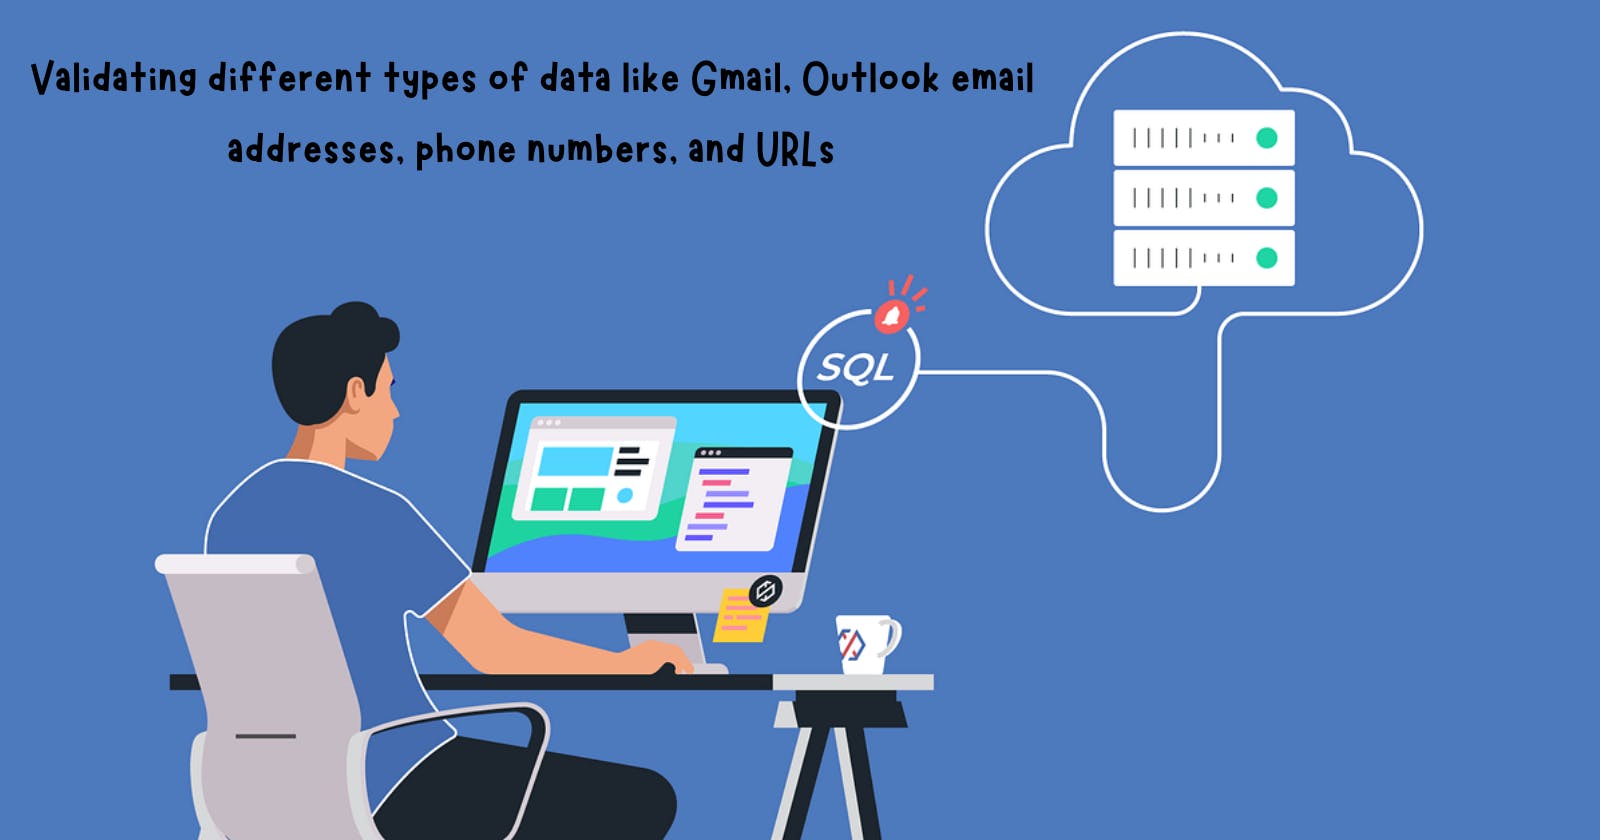 Validating different types of data like Gmail, Outlook email addresses, phone numbers, and URLs